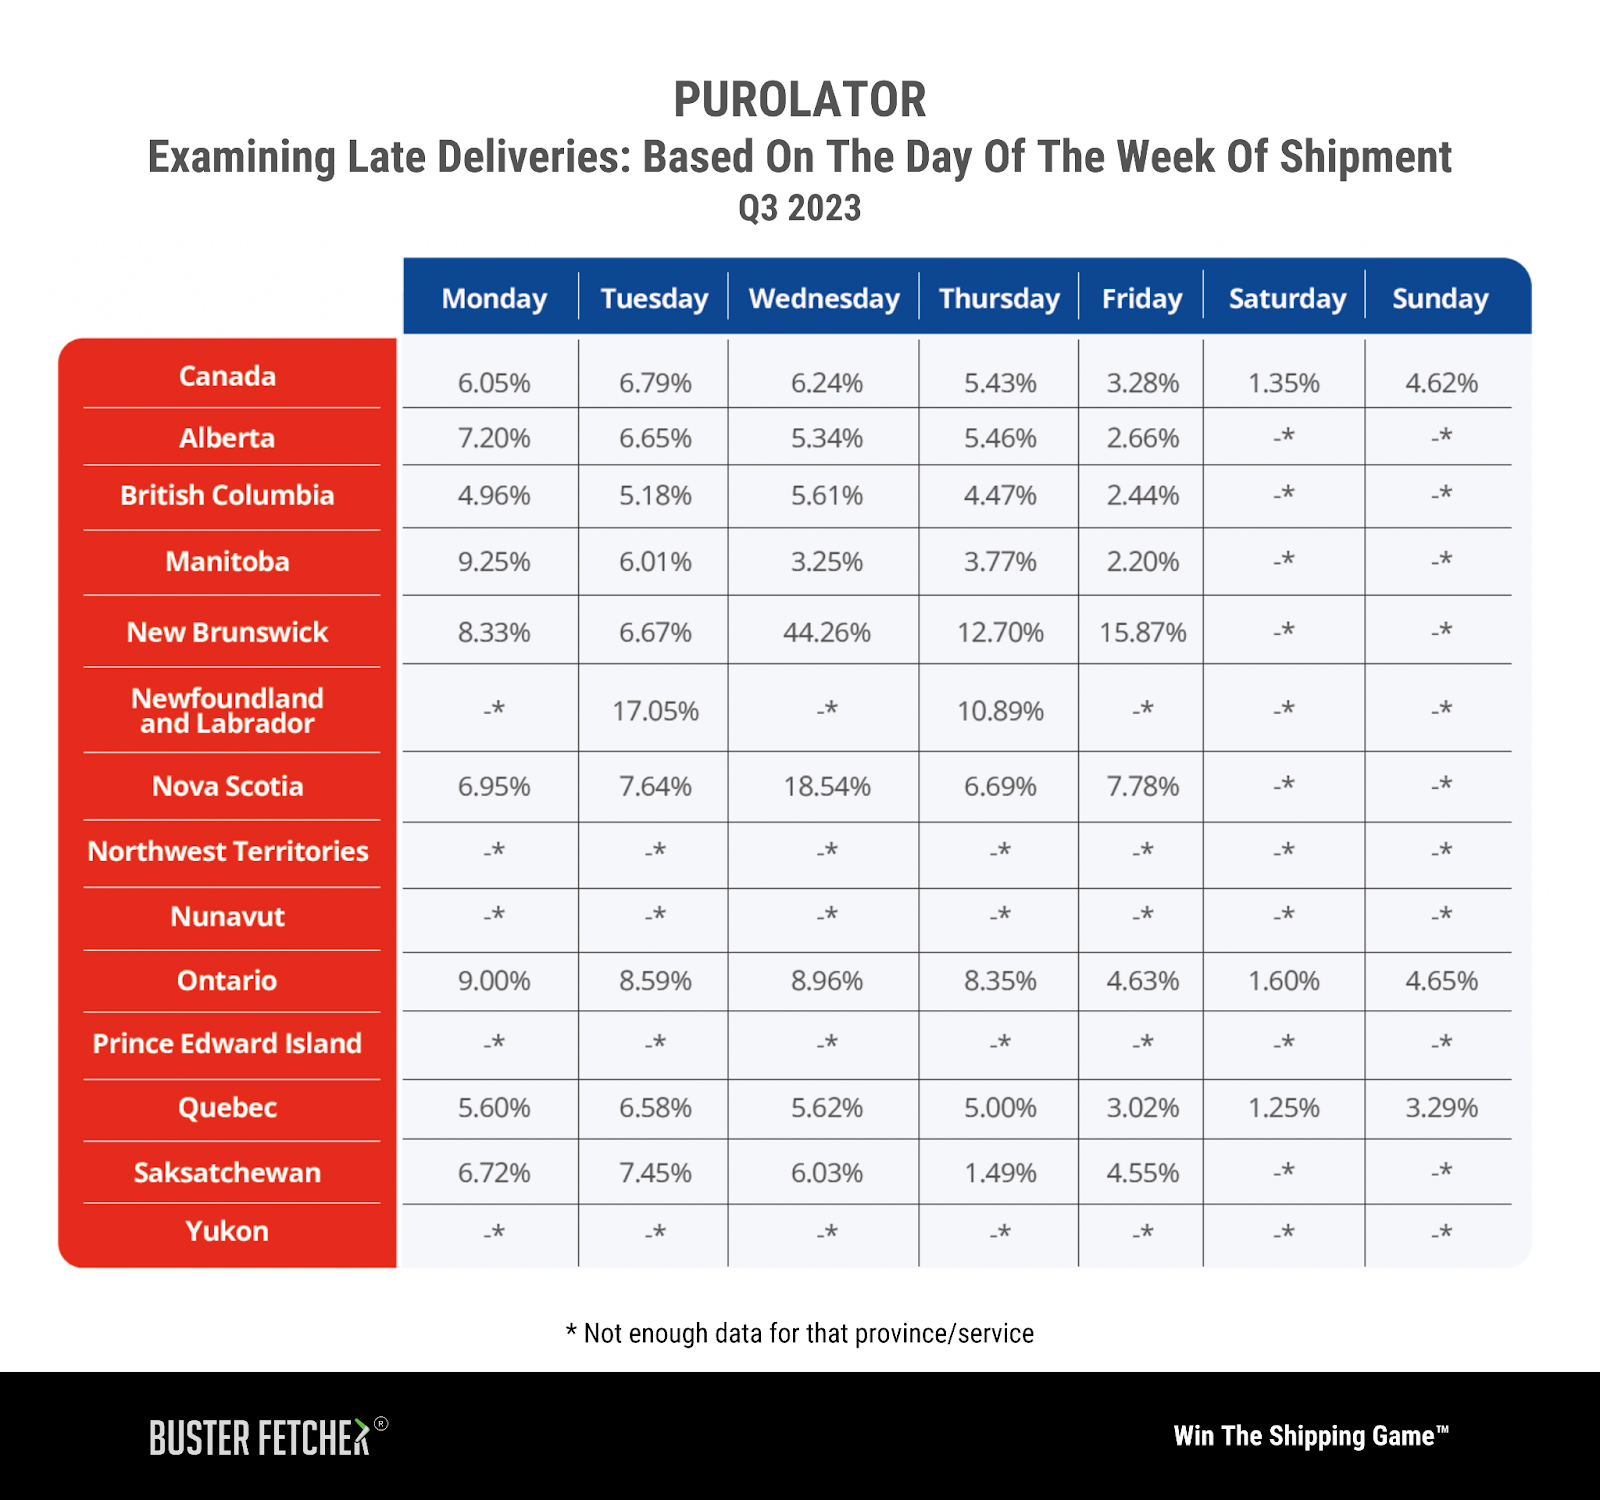 Purolator: Unpacking Delivery Consistencies and Day-Specific Surges